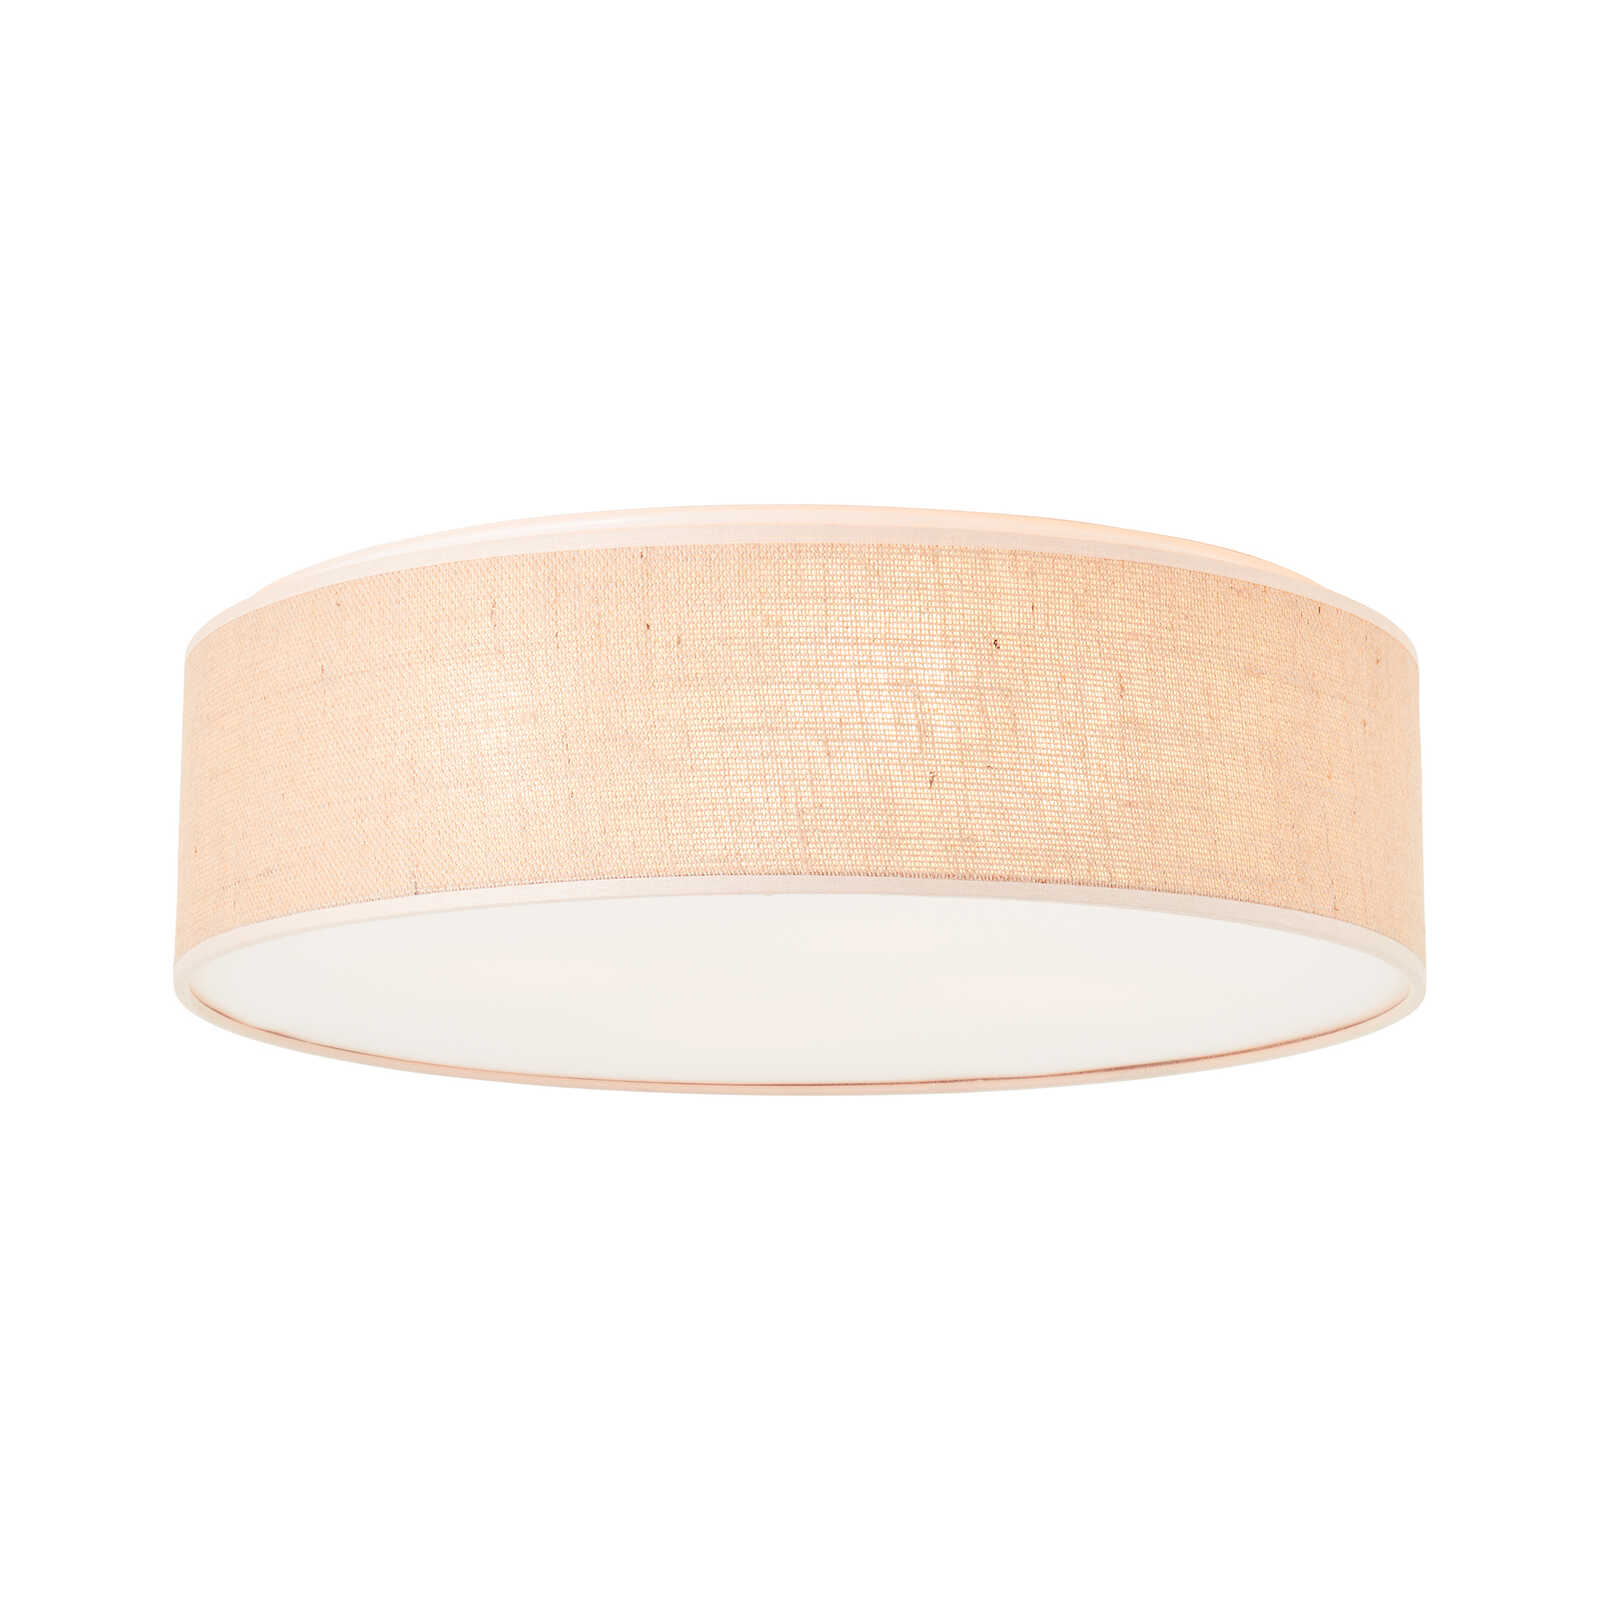 Textile ceiling light - Alicia 5 - Brown
